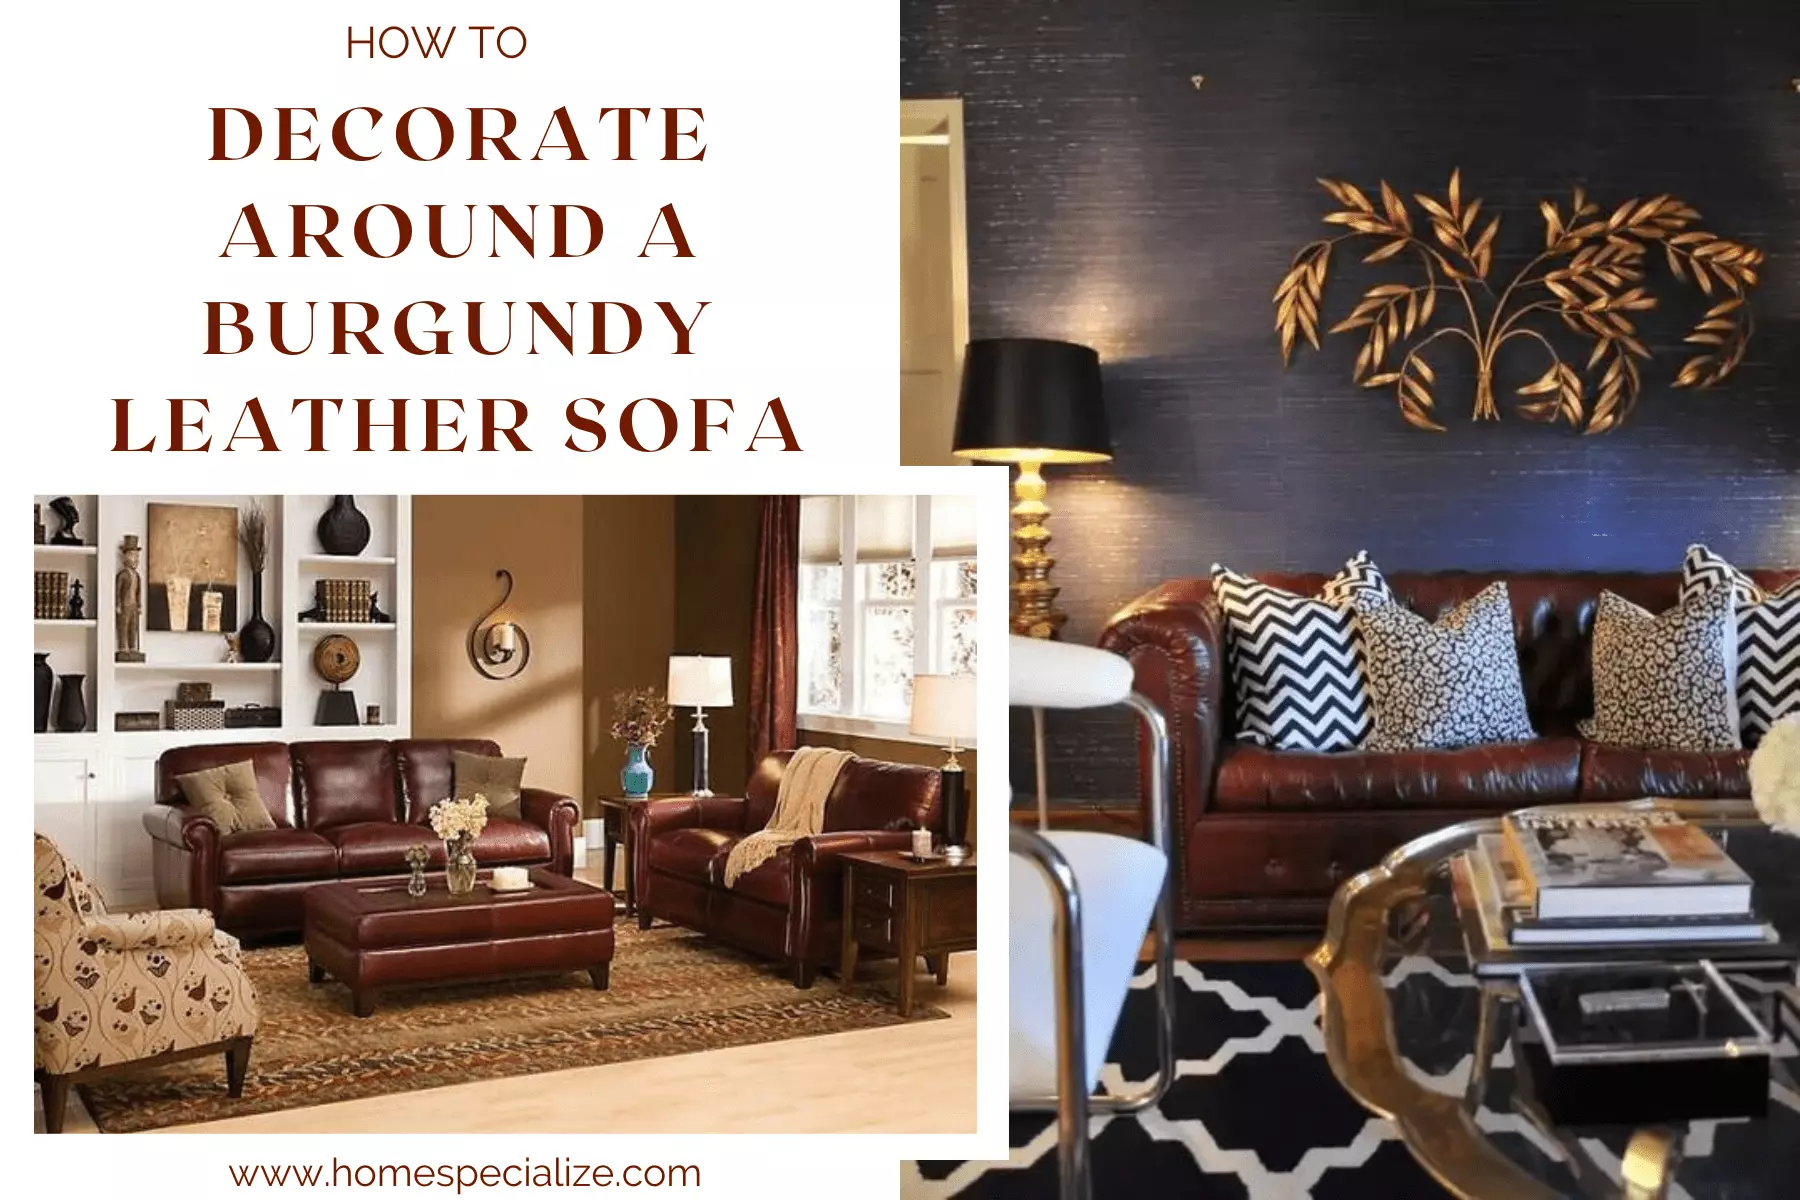 How to decorate around a burgundy leather sofa